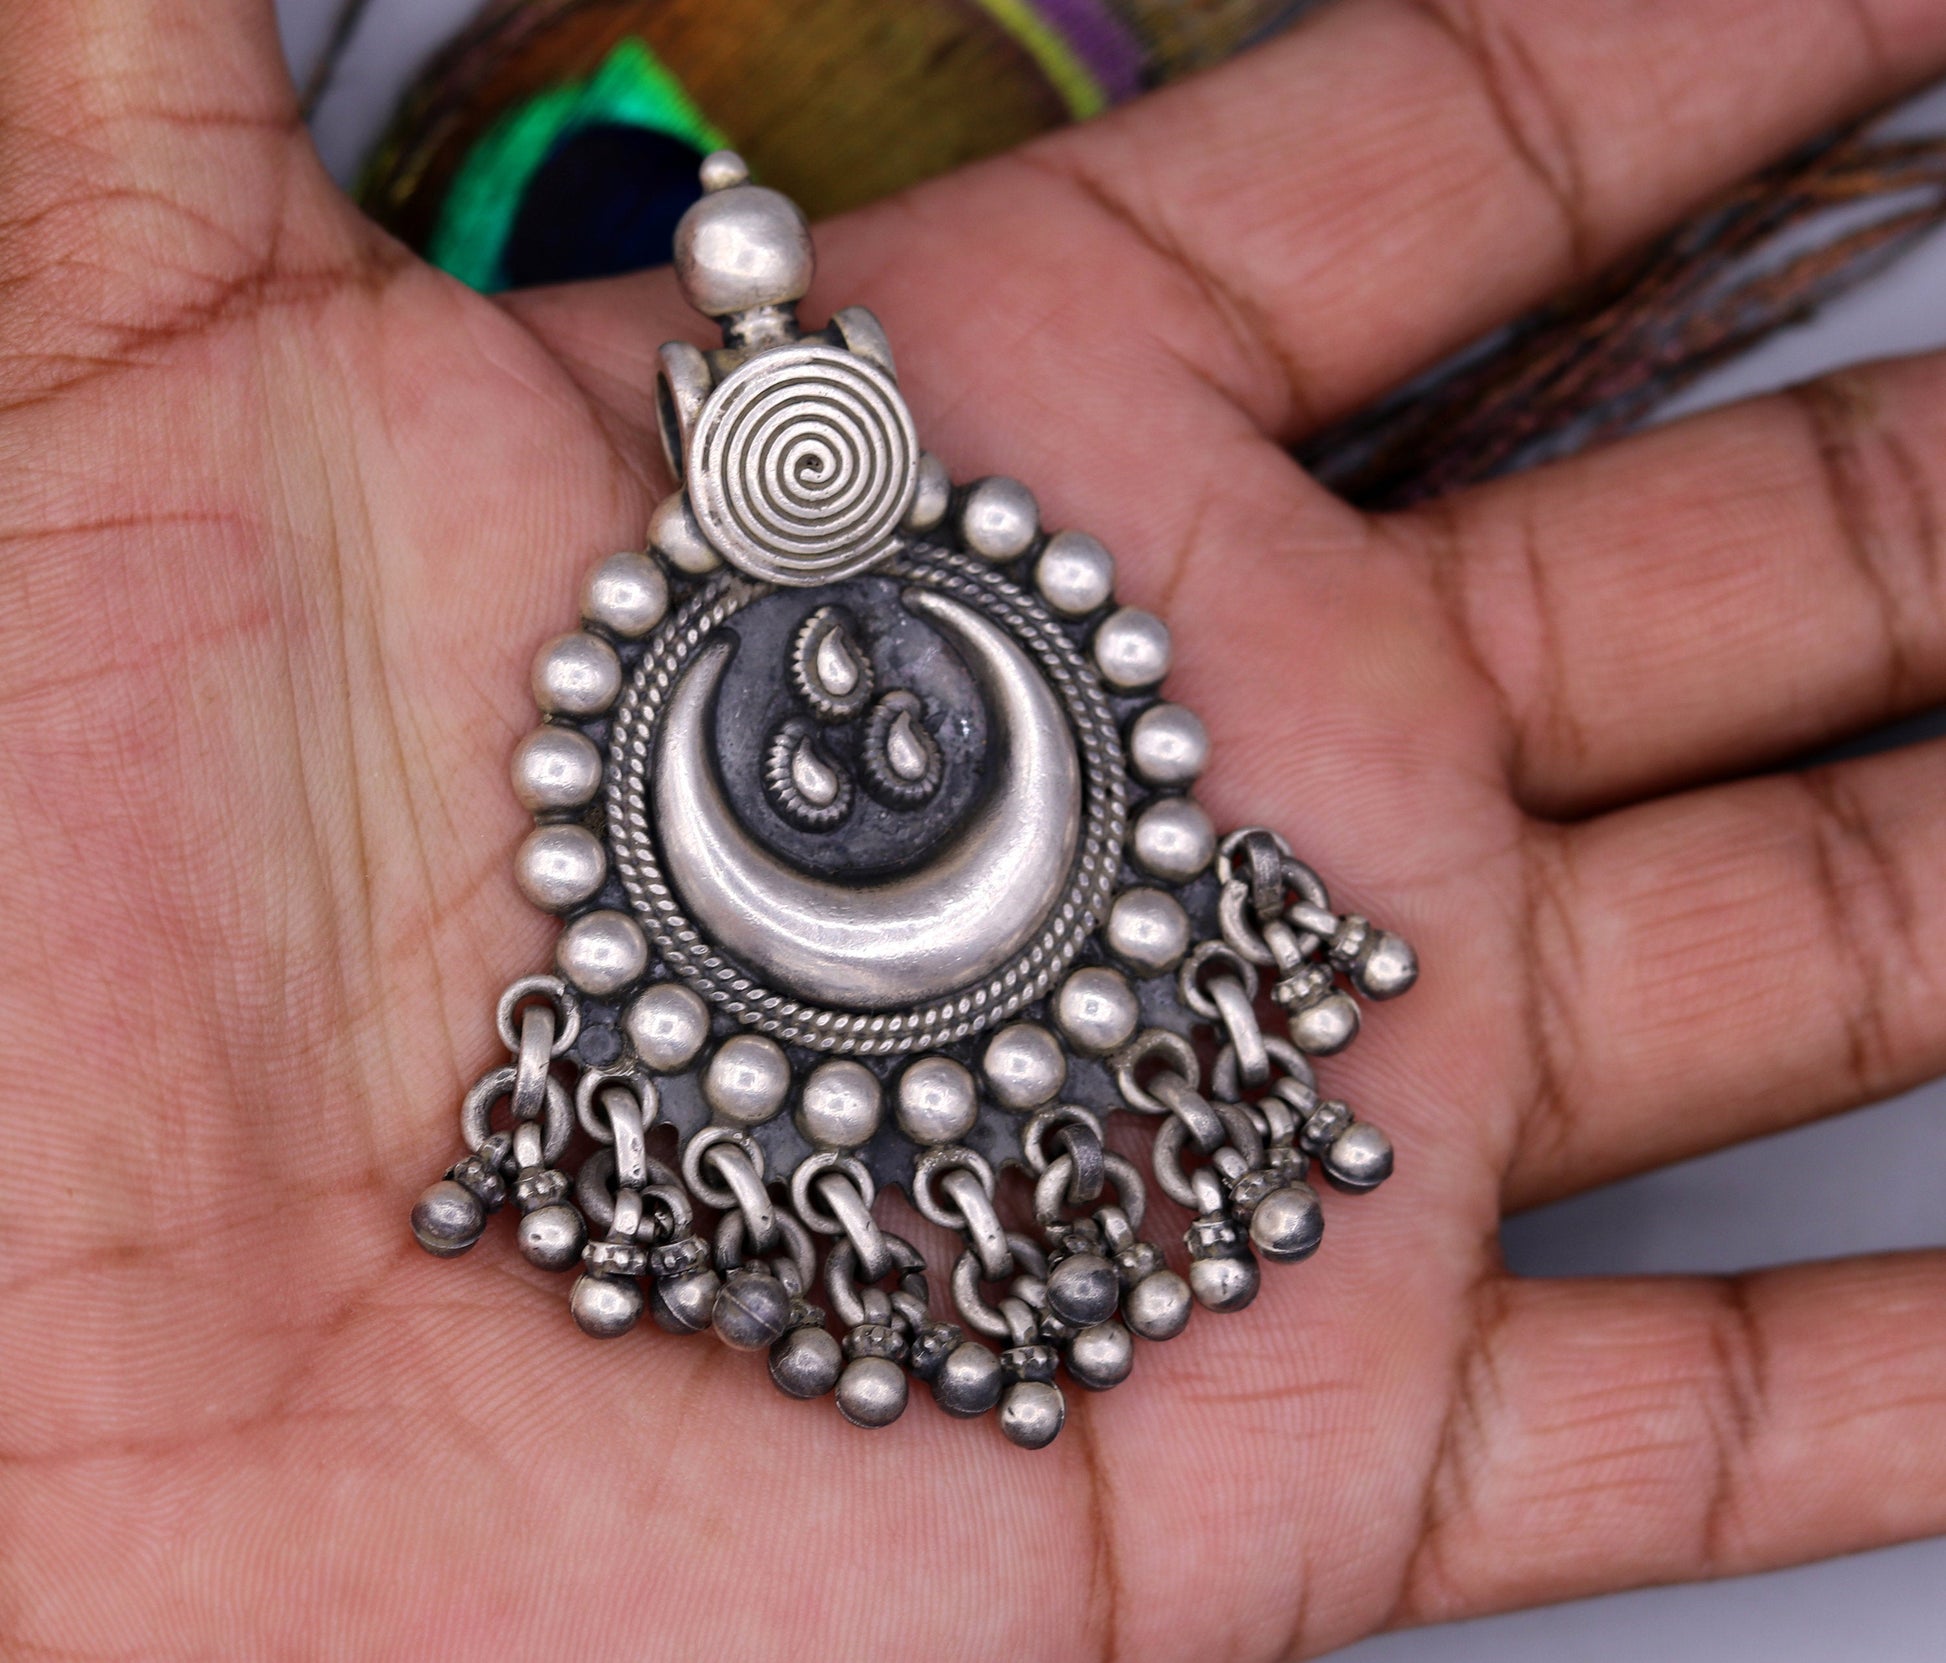 925 sterling silver handmade excellent half moon shape design vintage antique tribal pendant with hanging bells gifting jewelry nsp253 - TRIBAL ORNAMENTS